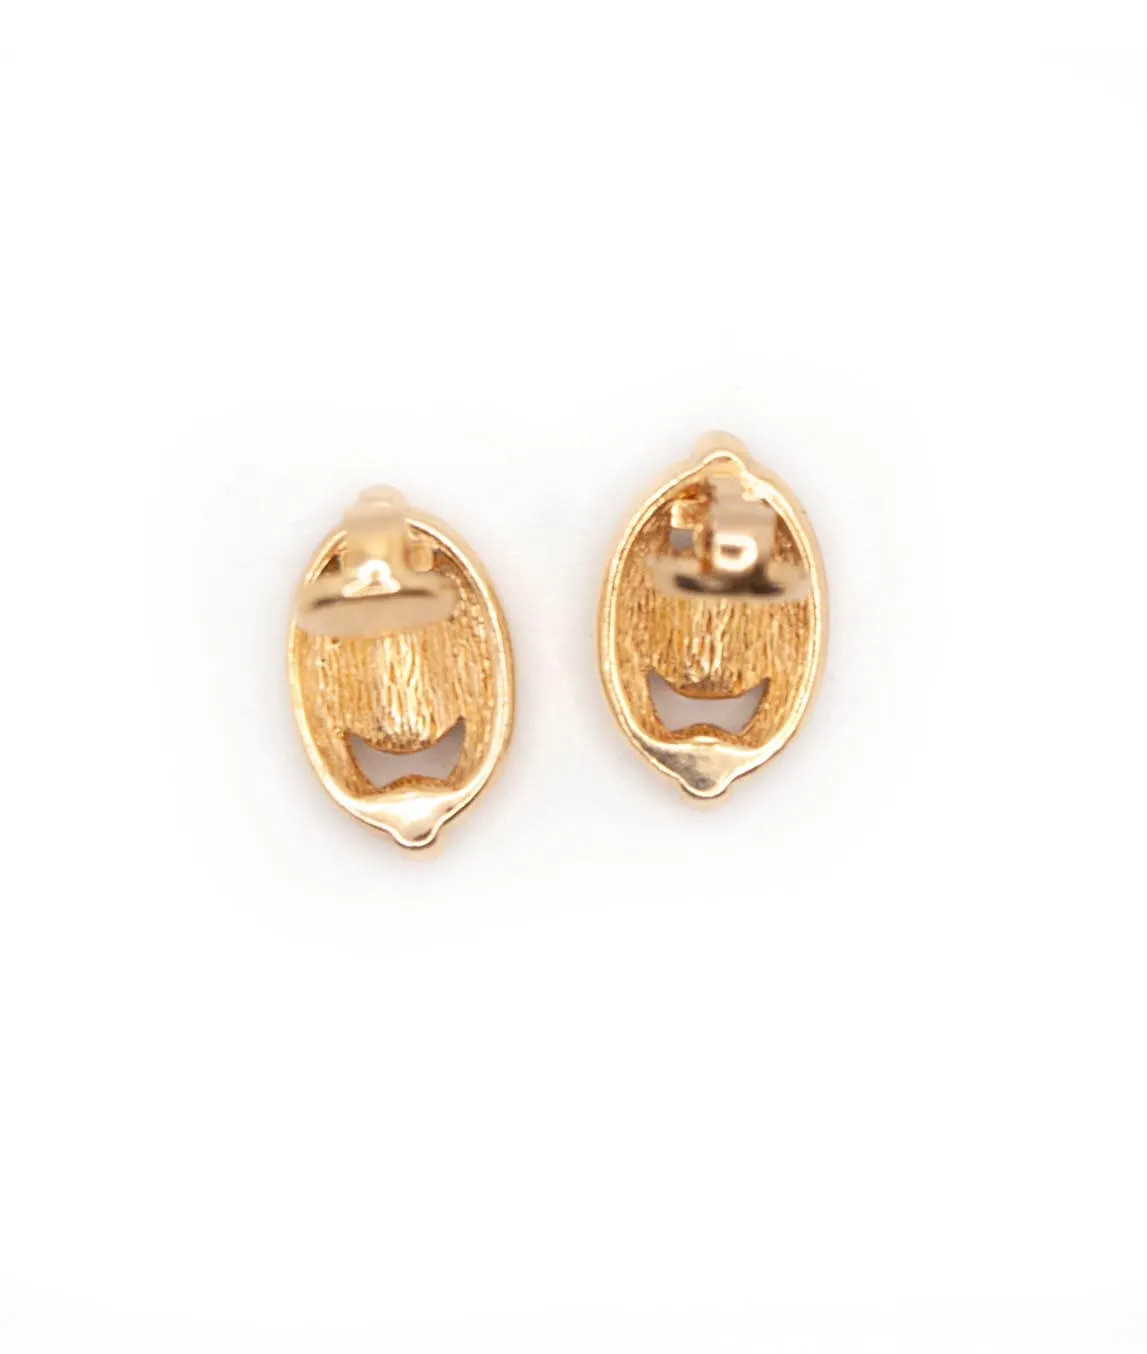 Christian Dior blue and gold clip-on earrings back